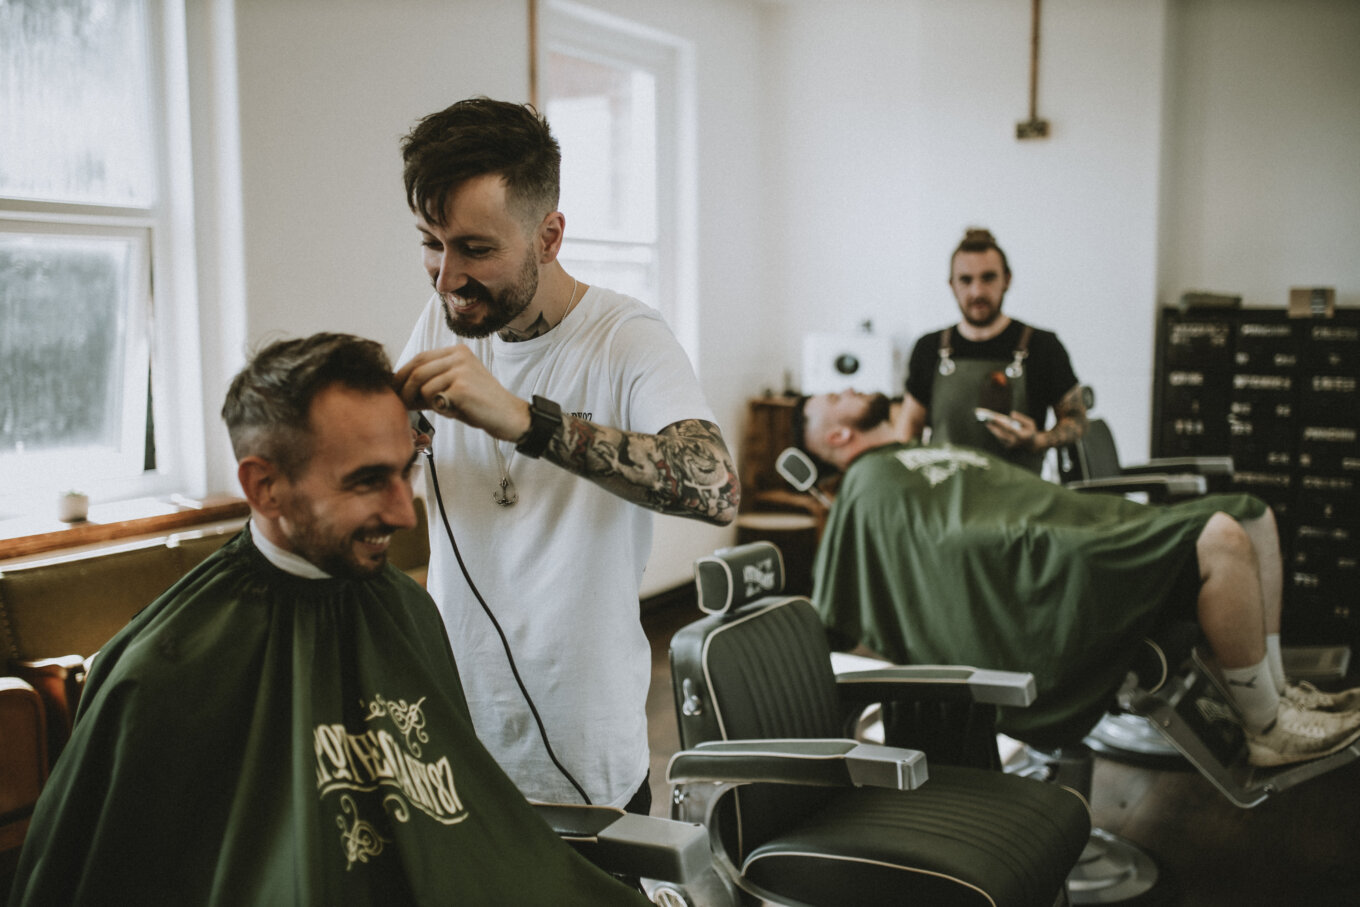 Barbers at Apothecary 87